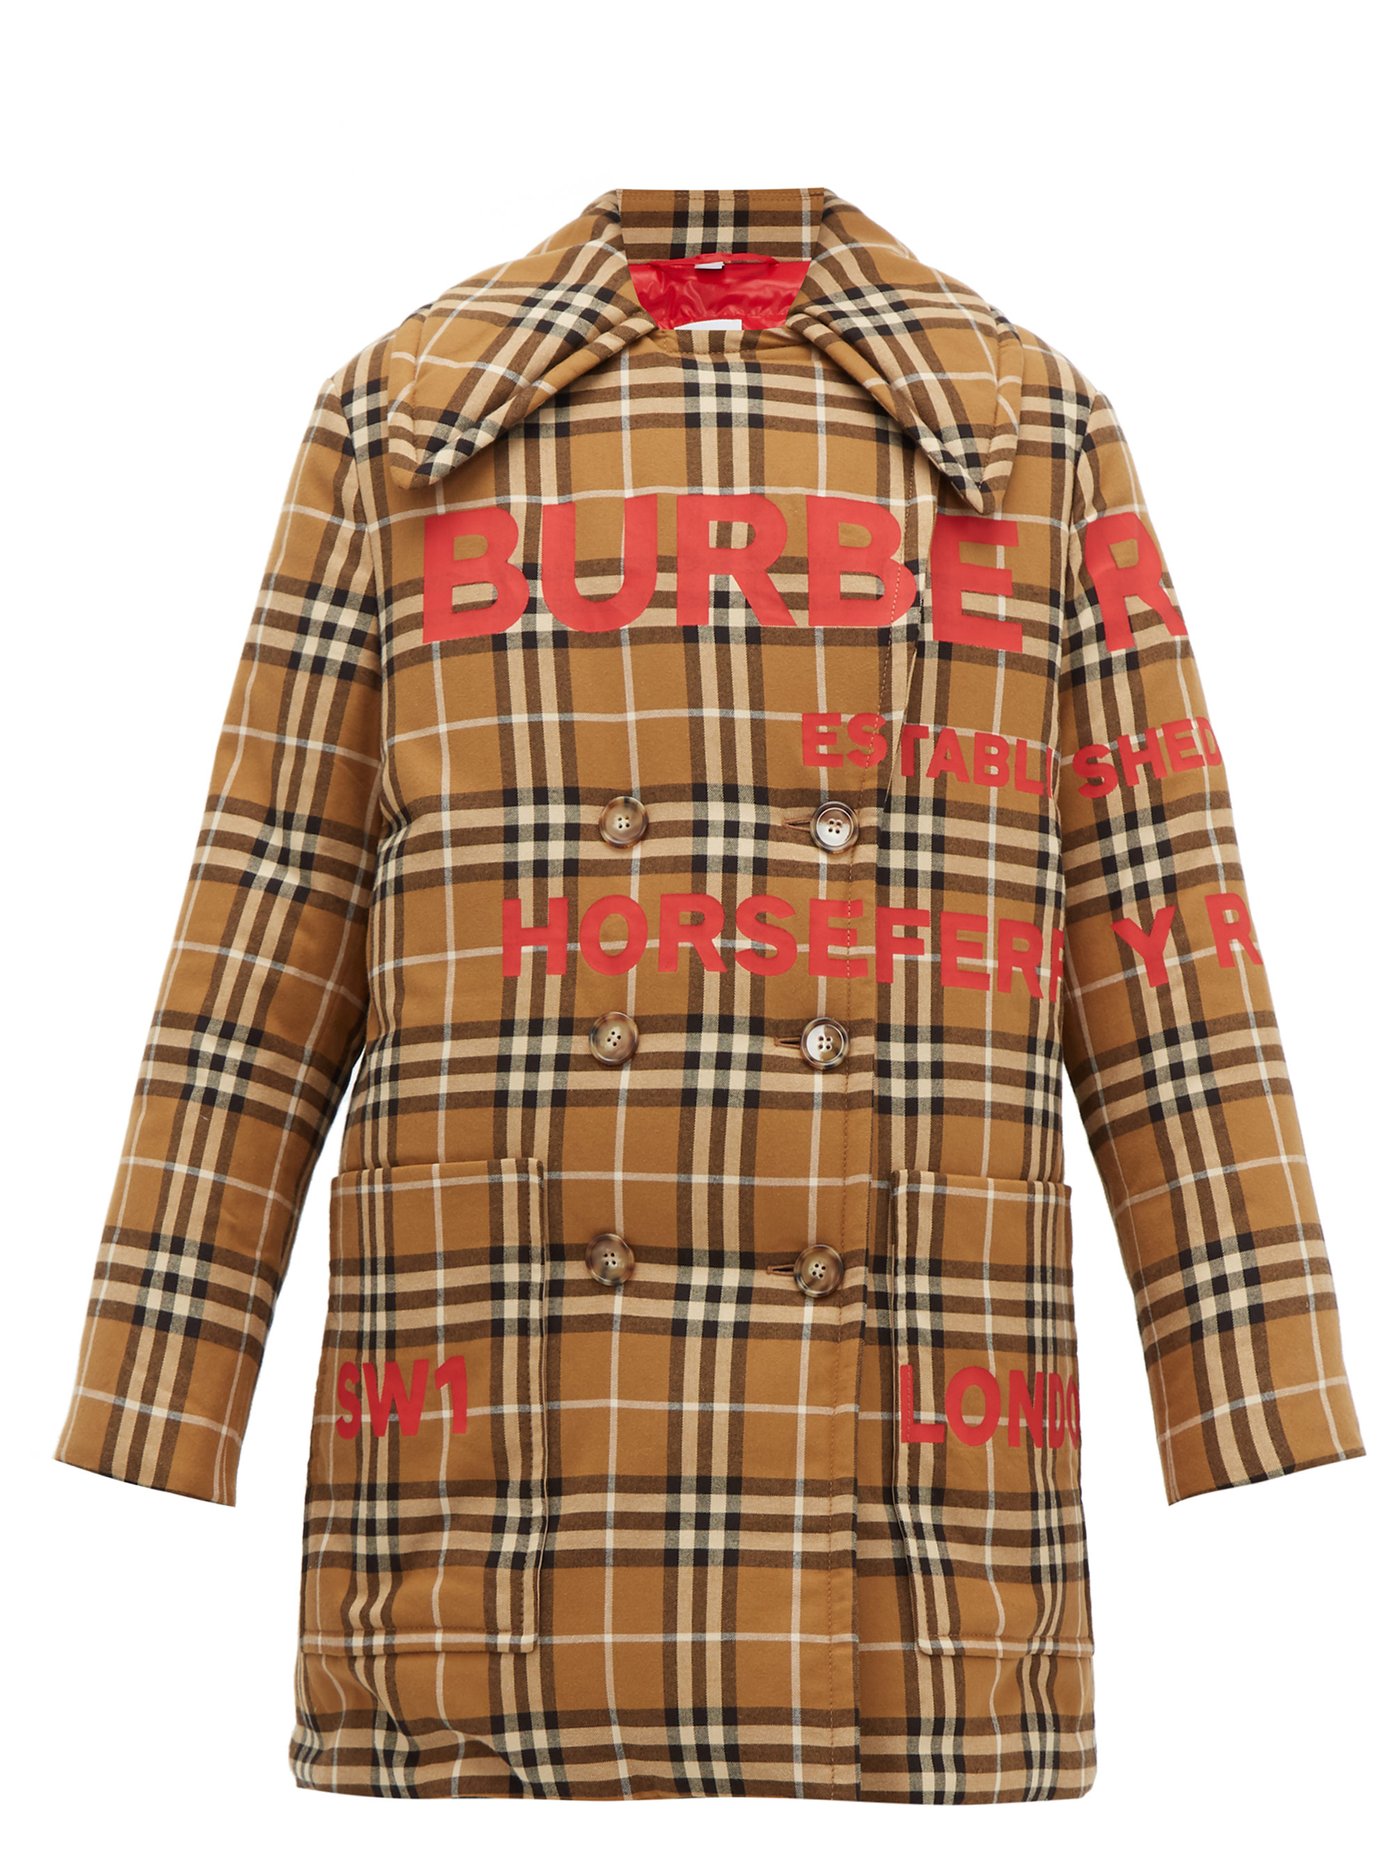 discounted burberry jackets